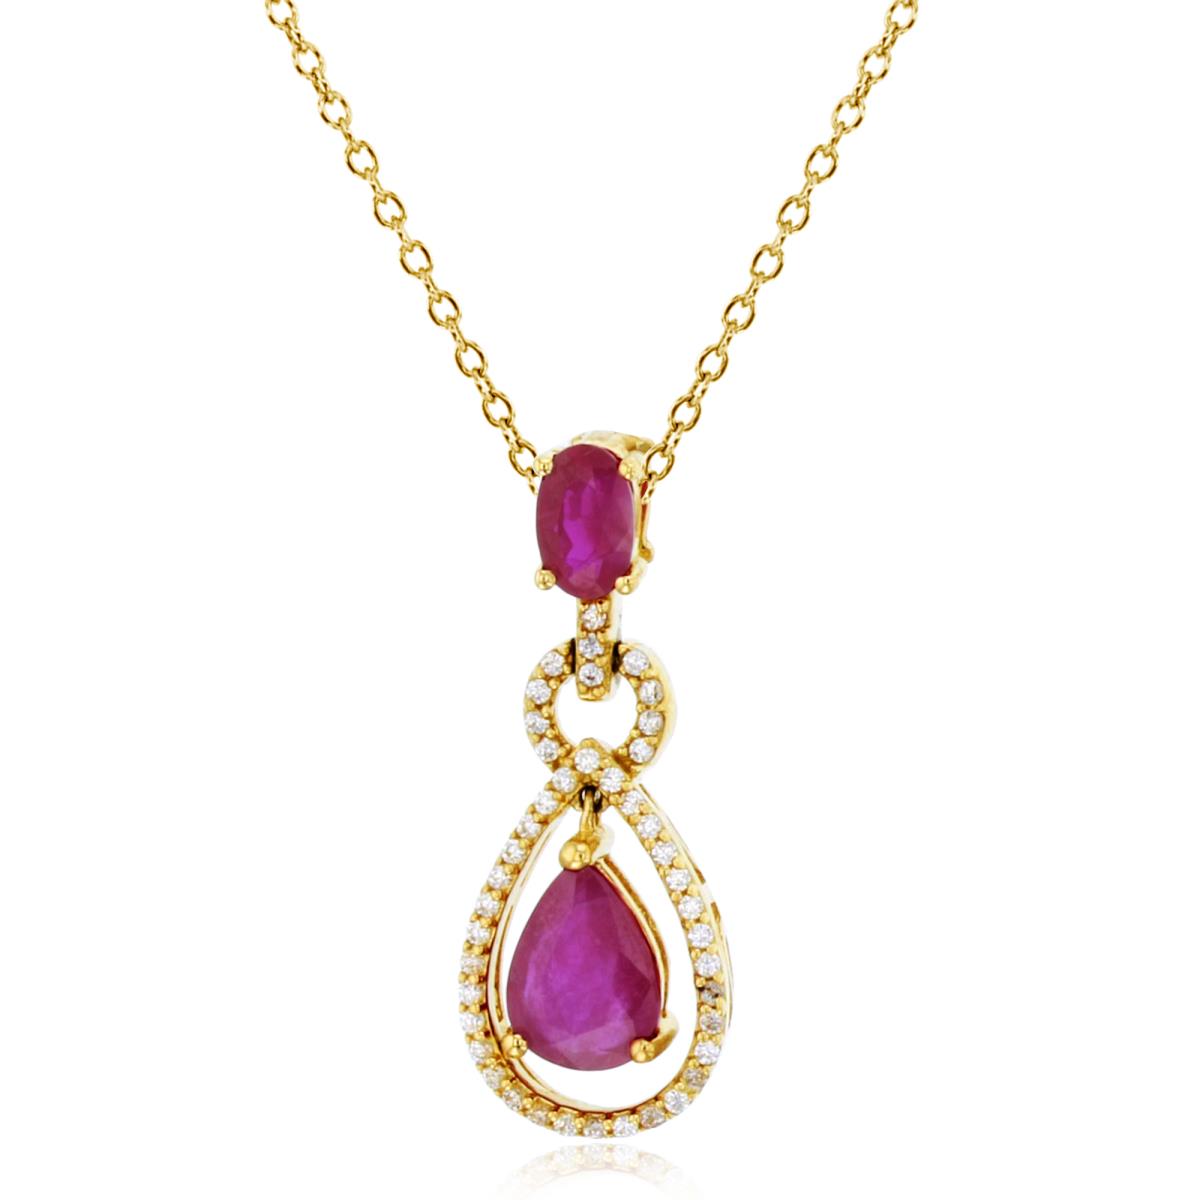 14K Yellow Gold 0.13cttw Rnd Diamonds & 7x5mm PS /5x3mm Ov Ruby  16"+1"+1"Necklace